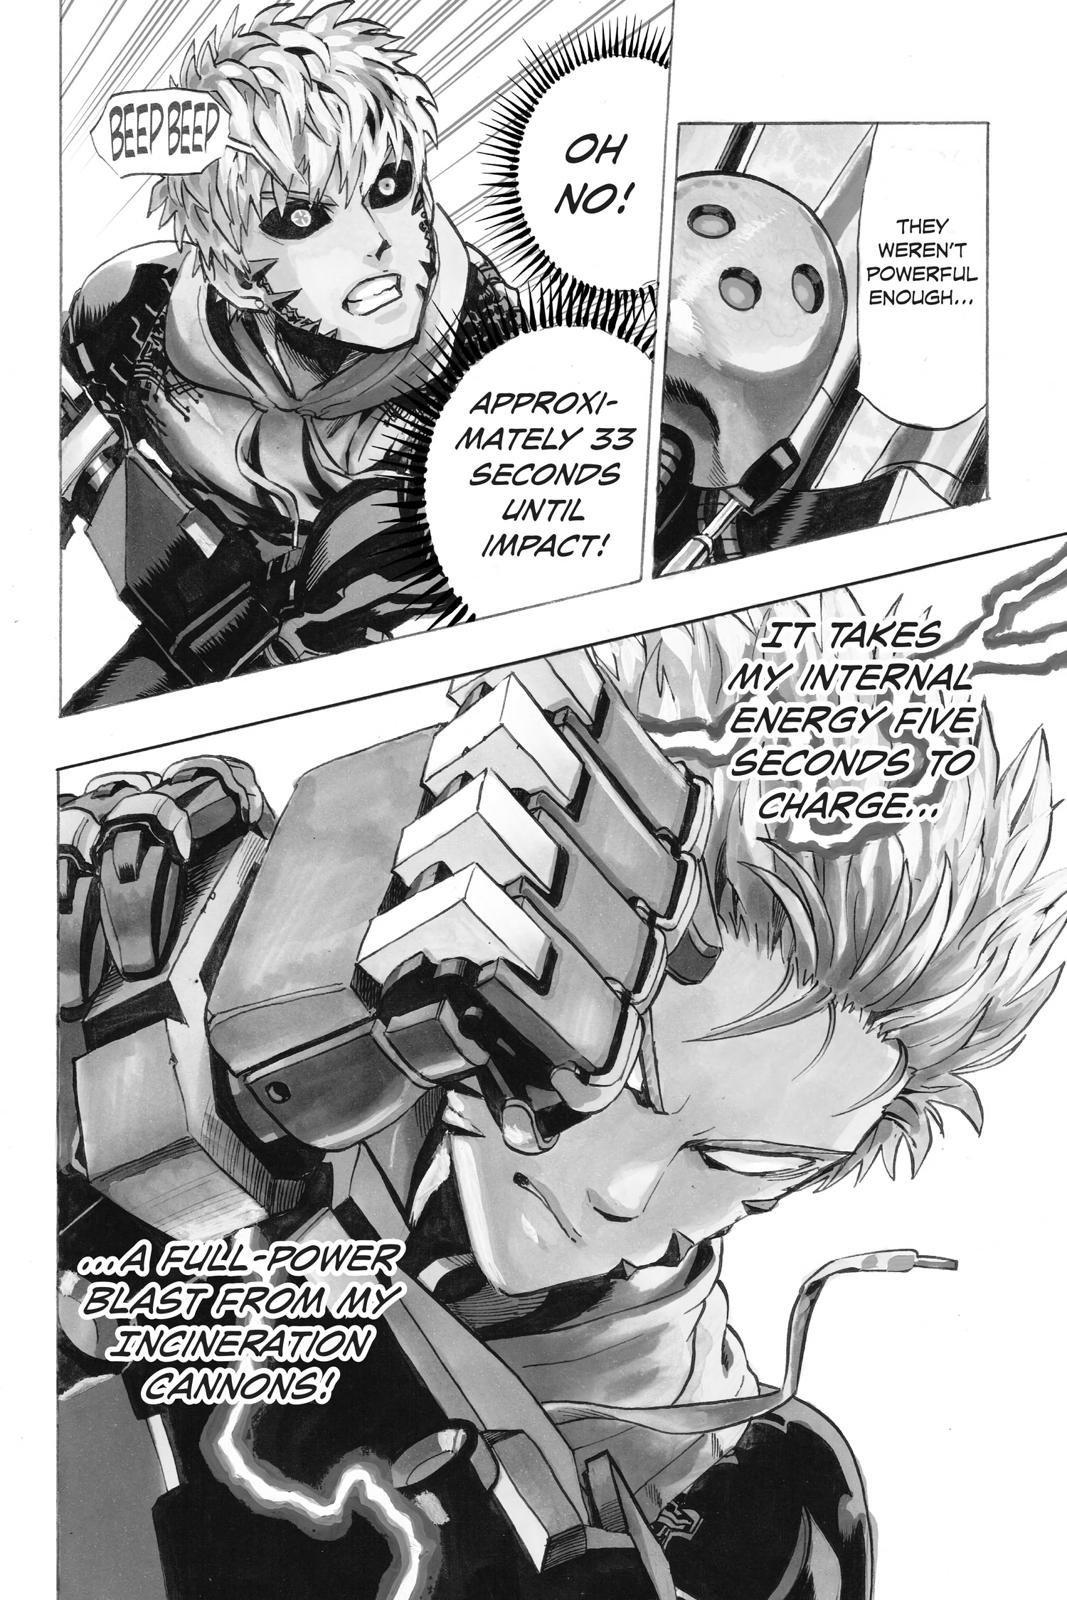 One-Punch Man, Punch 21 image 44